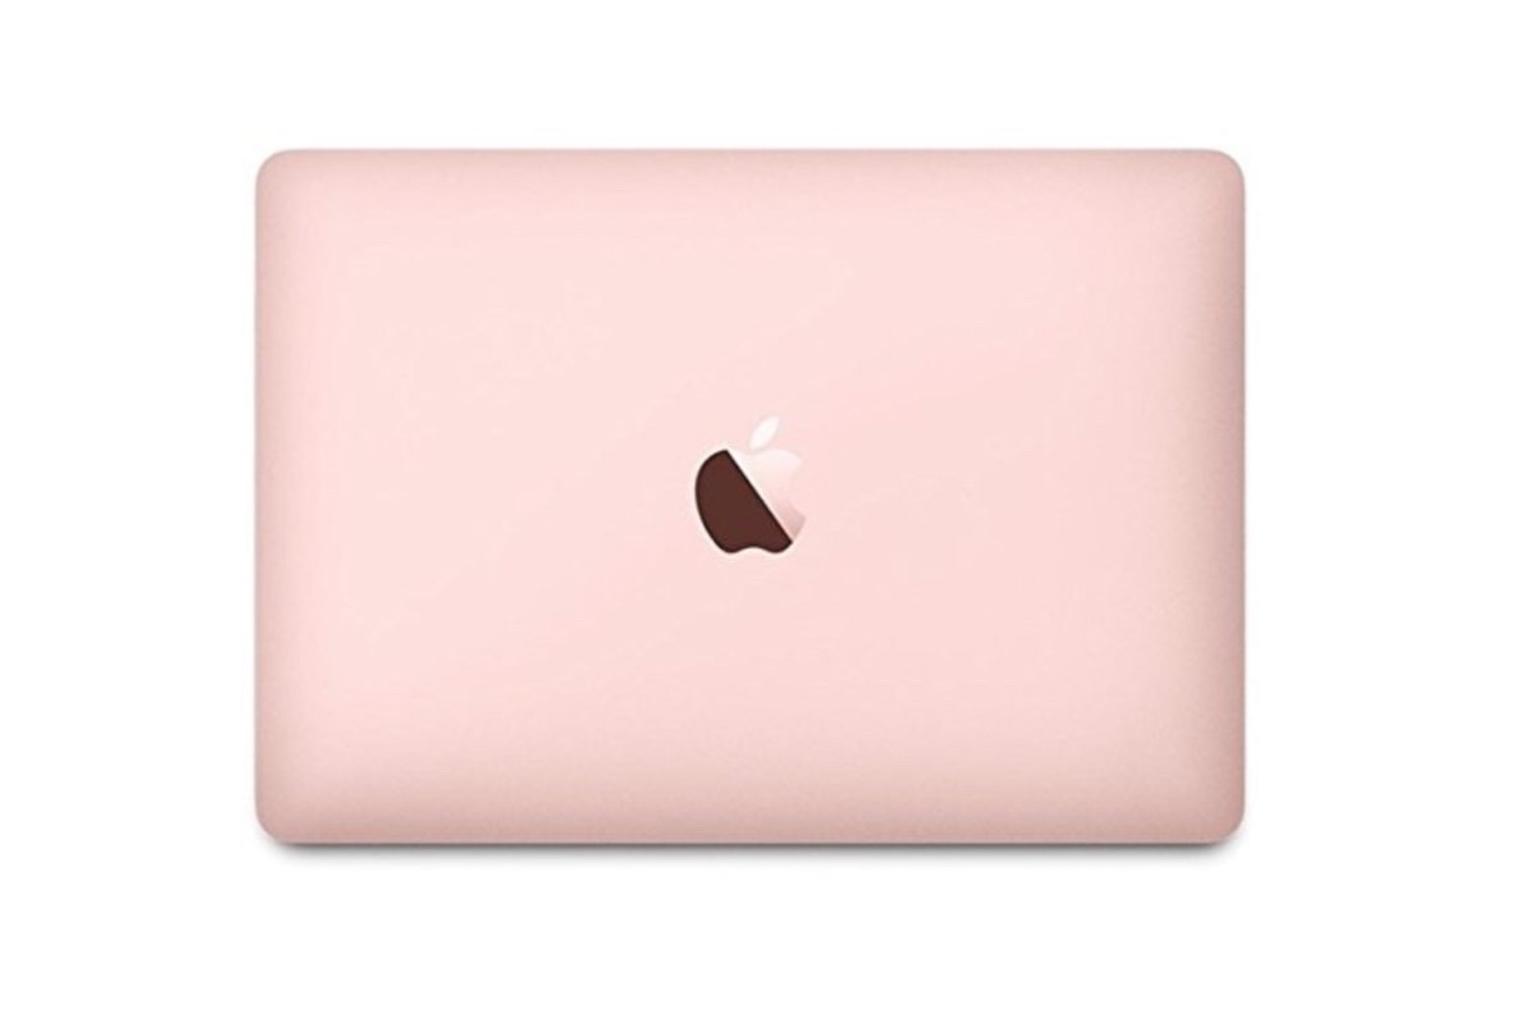 Rose Gold Macbook Air In Ls21 Pool In Wharfedale For 800 00 For Sale Shpock